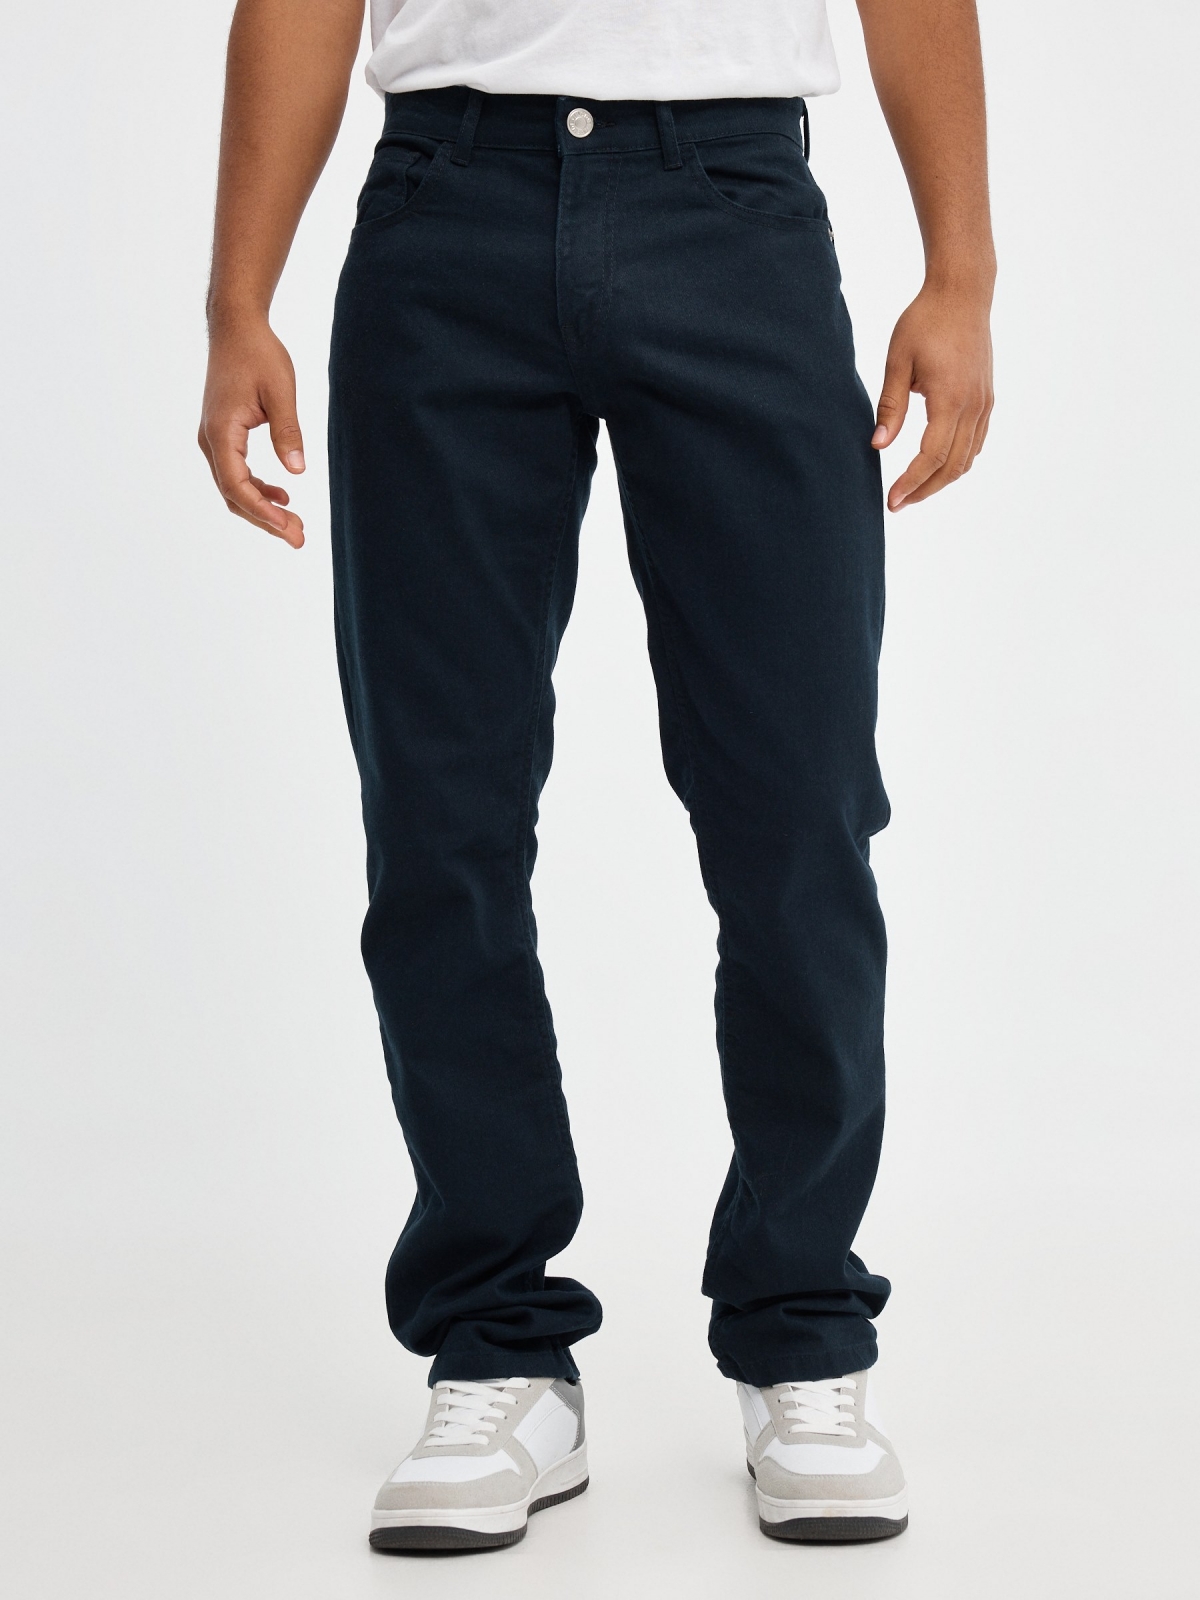 Basic colored jeans blue middle front view